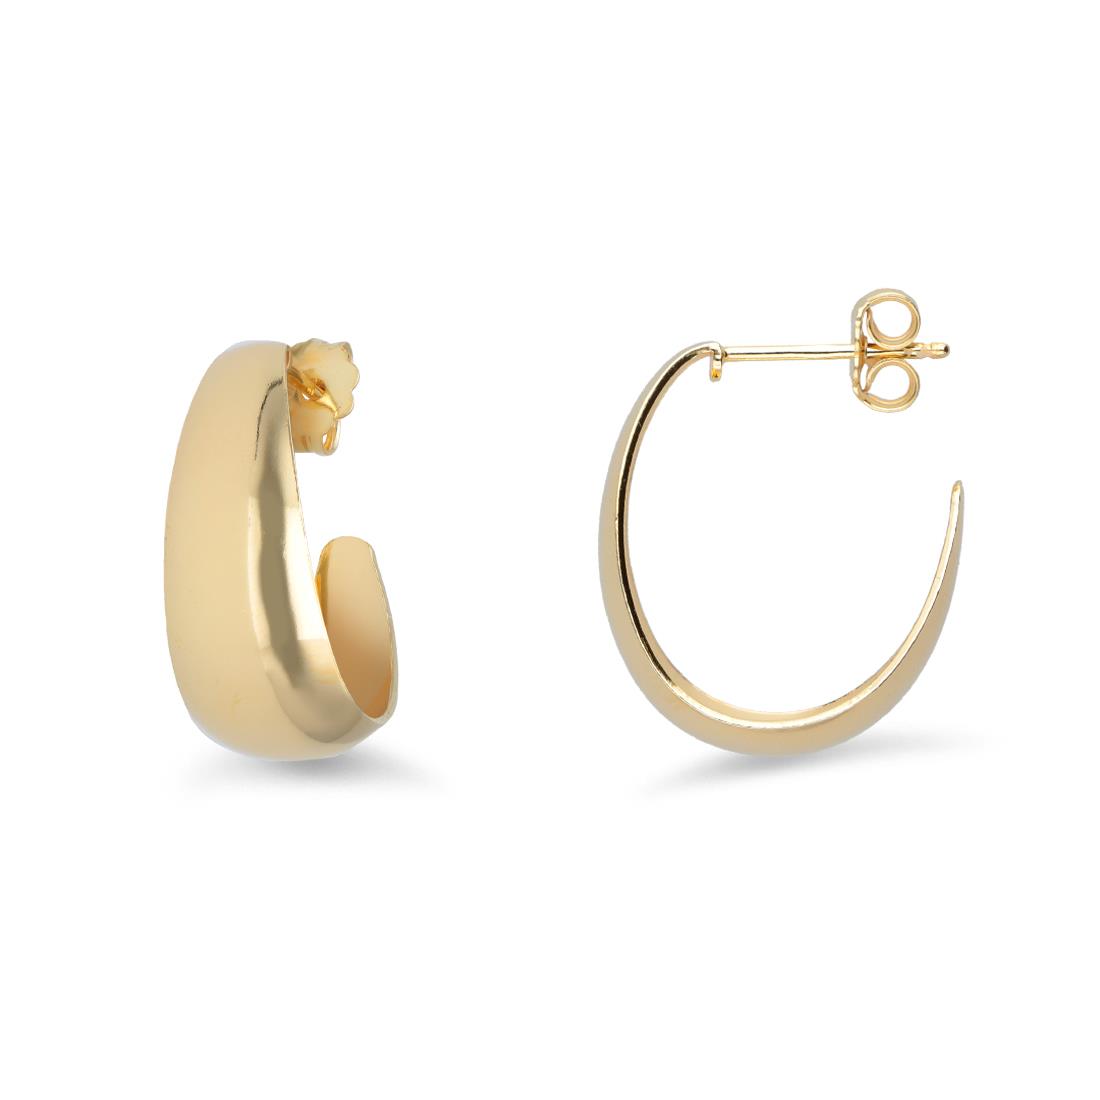 Oval convex earrings from the Hula Hoop collection in 925 yellow silver - LUXURY MILANO